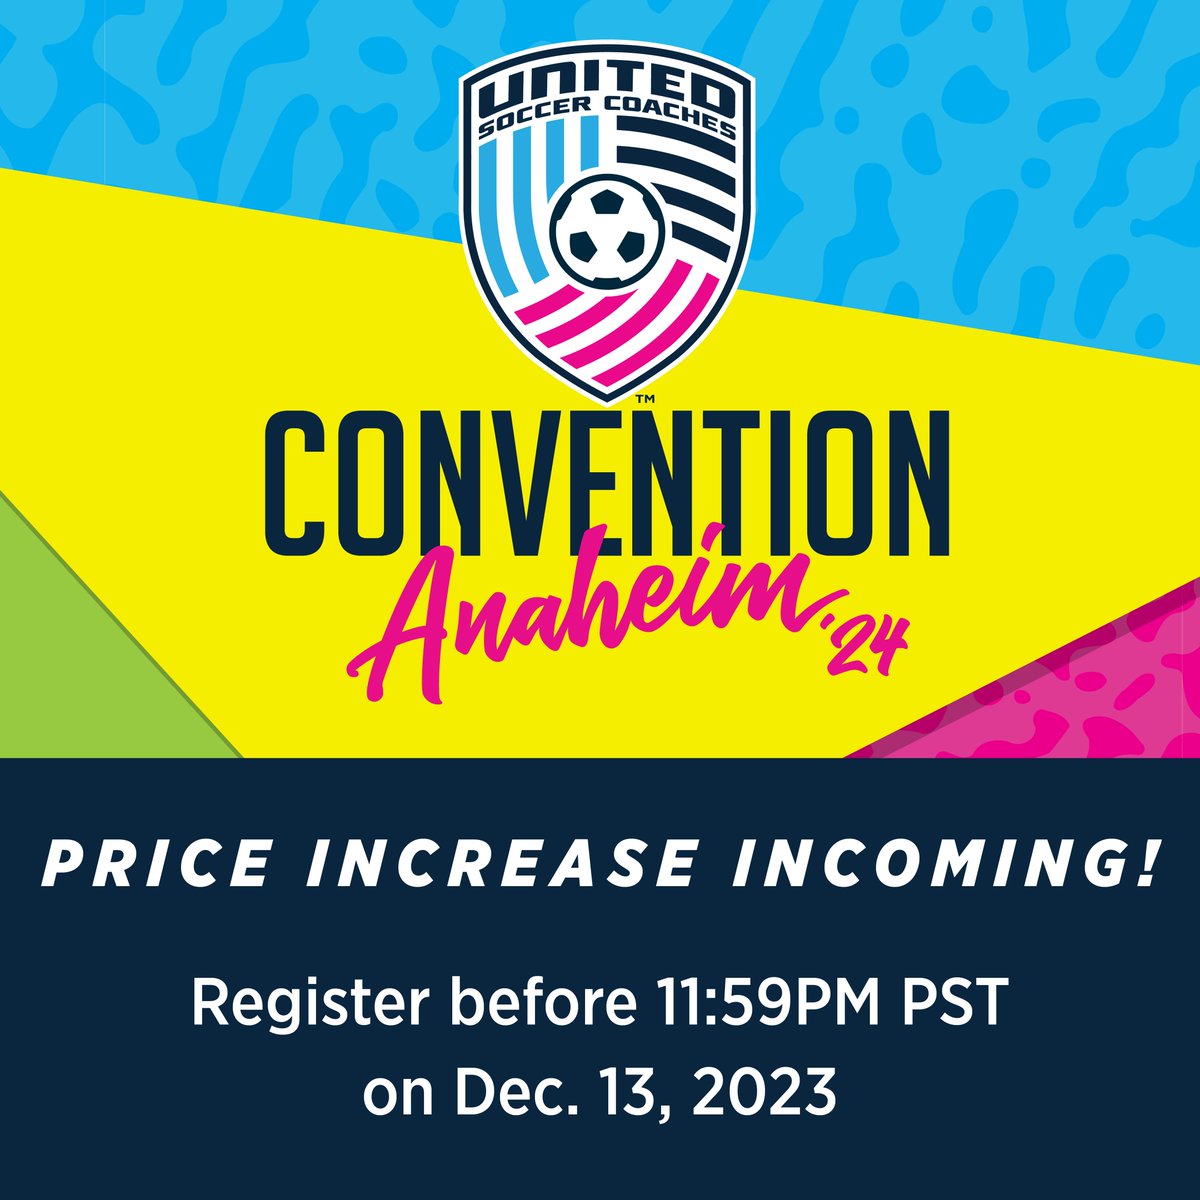 📣 Attention: PRICE INCREASE INCOMING! Register by 11:59 PM PST on December 13th to enjoy current lower rates! #StrongerUnited24 ⚽ 🌴 Join us in Anaheim for an exciting soccer education and networking event! #StrongerUnited24 Register: bit.ly/32NTeT1